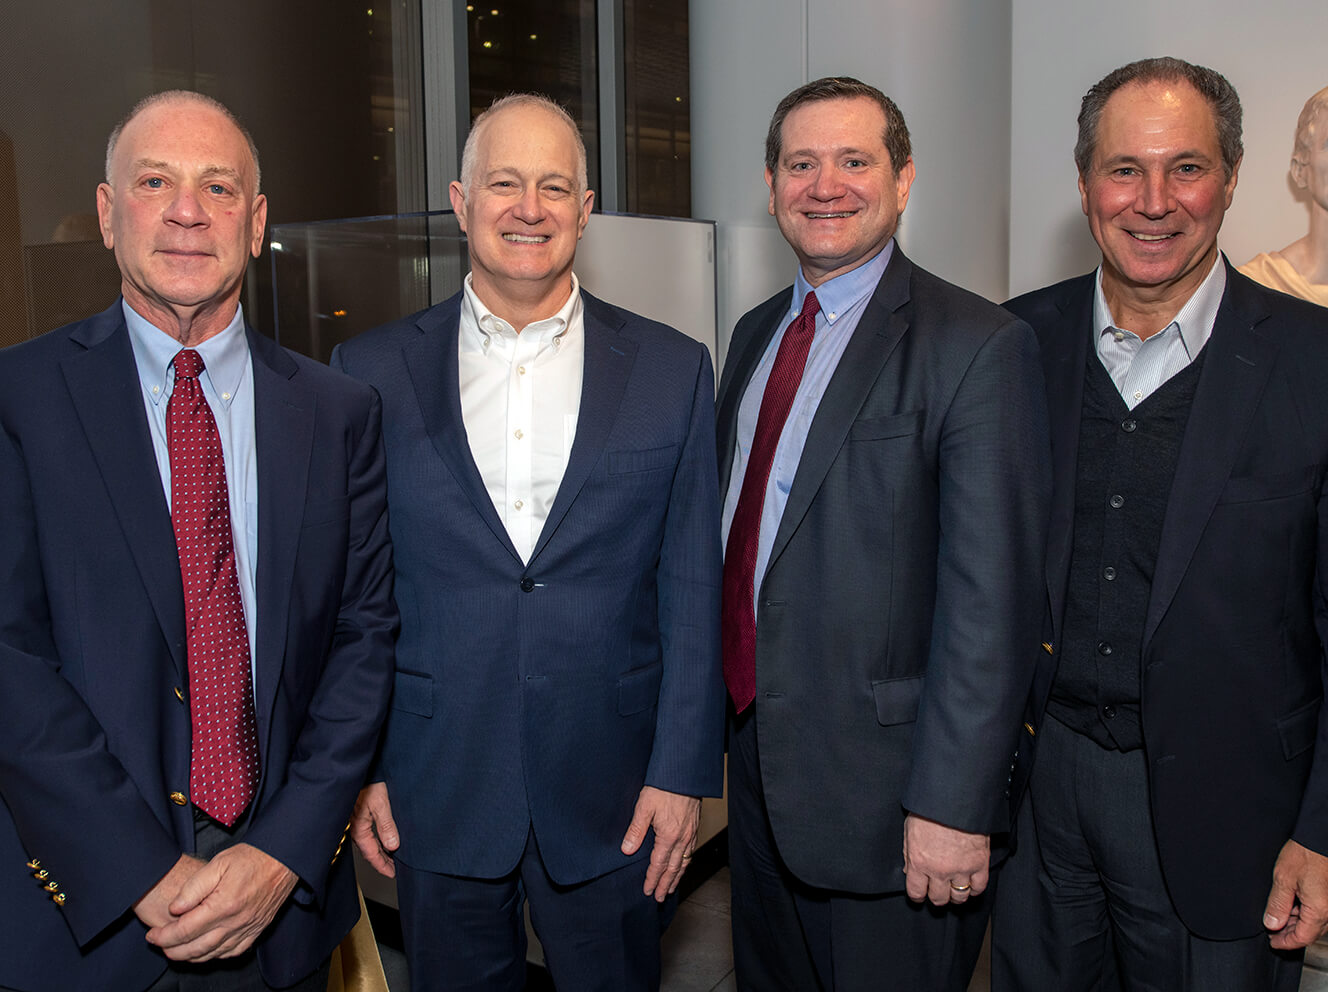 From left: Lunder Foundation President Kevin Gillis, Mass General President David. F. M. Brown, MD, Mass General Chief Learning Officer and incumbent of the David F. M. Brown, MD Endowed Education Academy Chair, James A. Gordon, MD, MPA, and Carl Martignetti, president of Martignetti Companies and vice chair of the Mass General Board of Trustees and co-chair of the Mass General capital campaign.